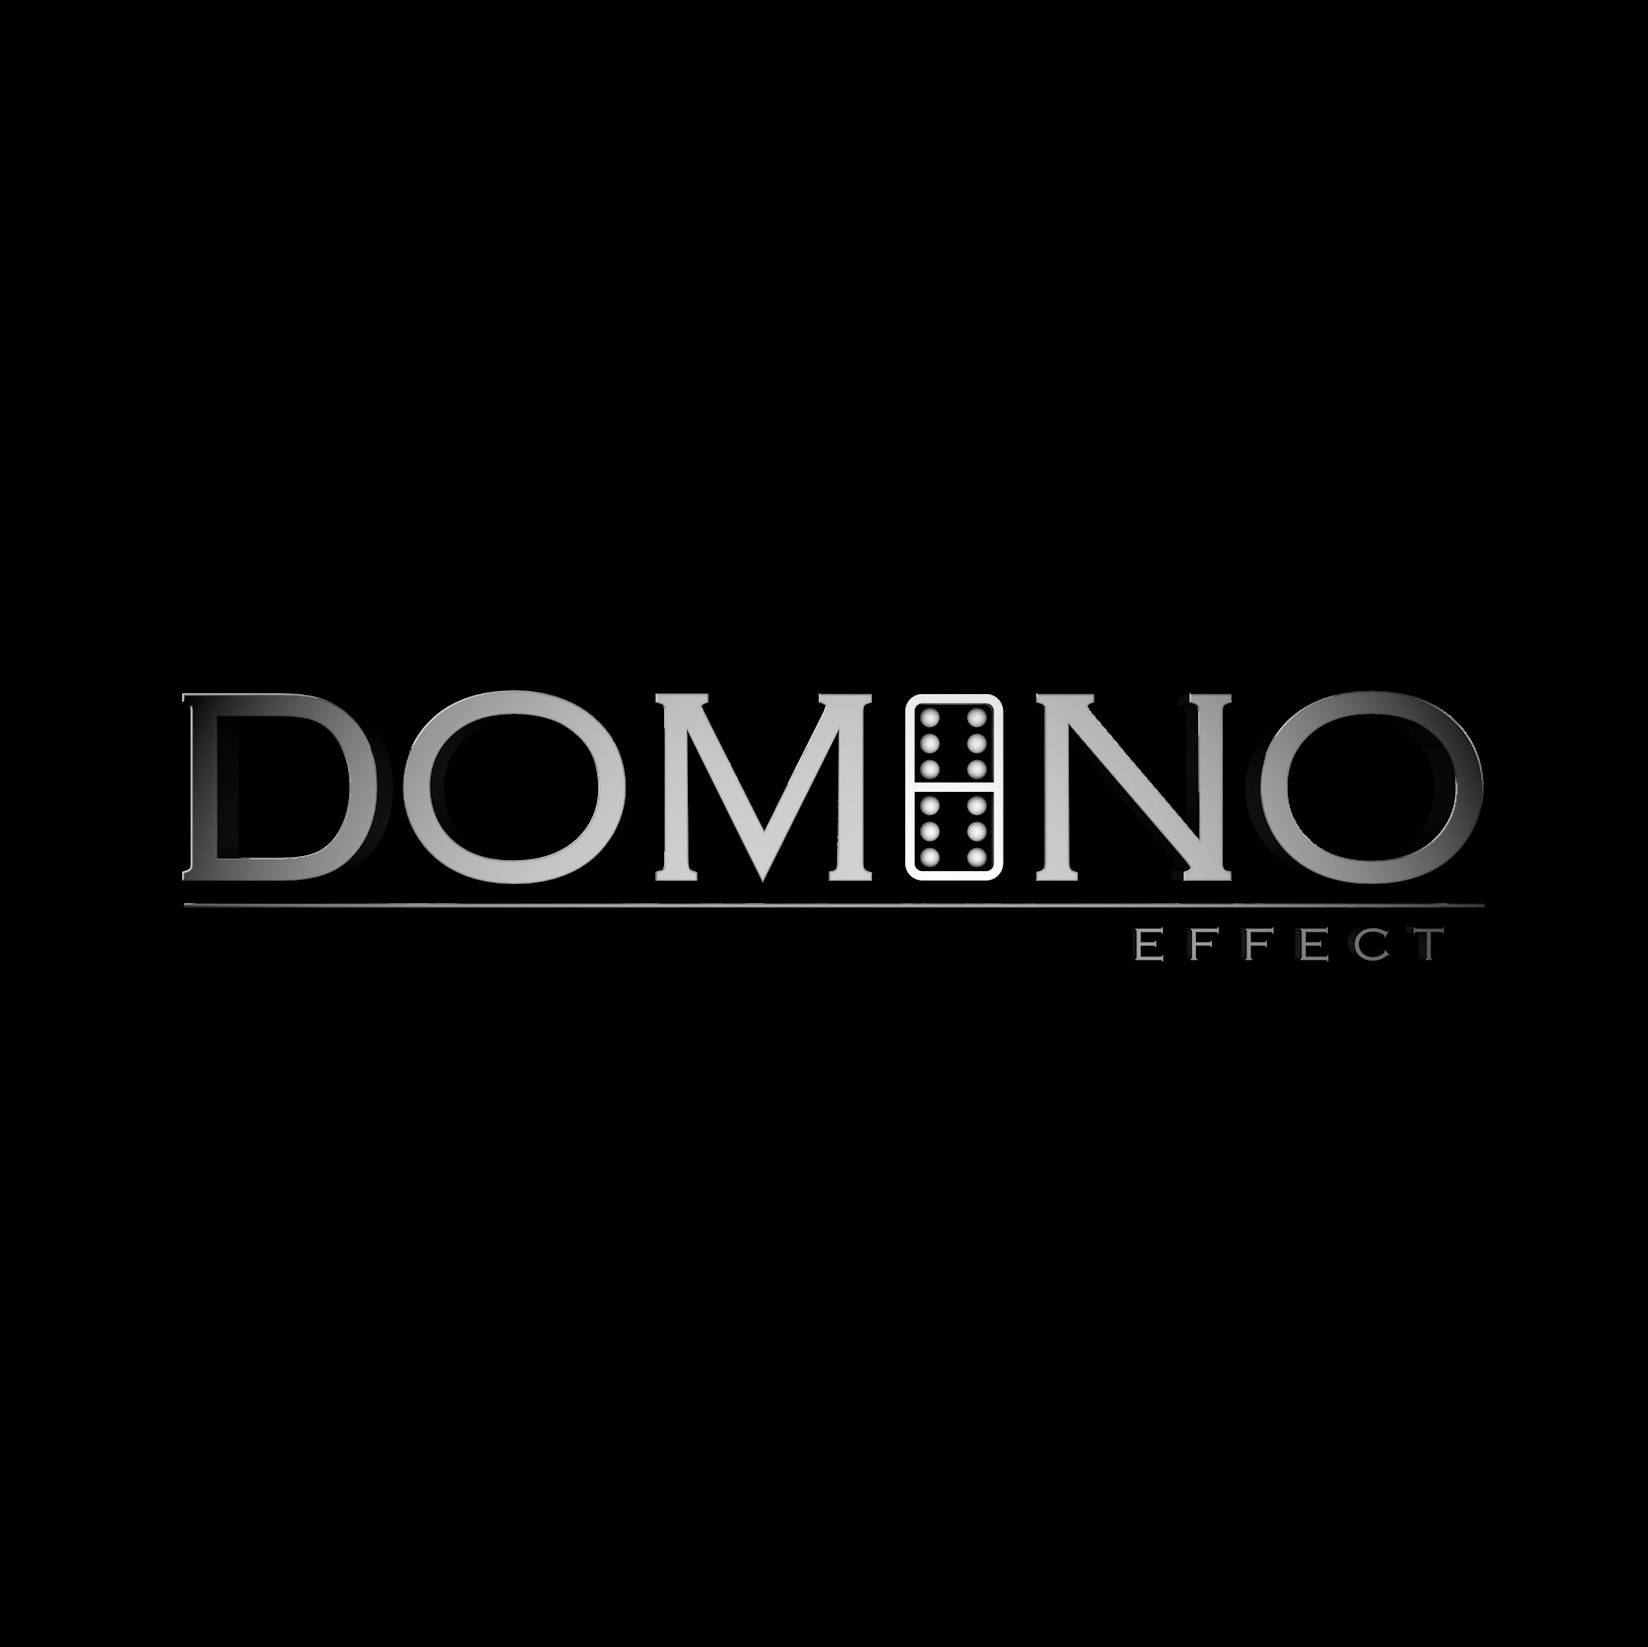 Domino Effect. Channel effects